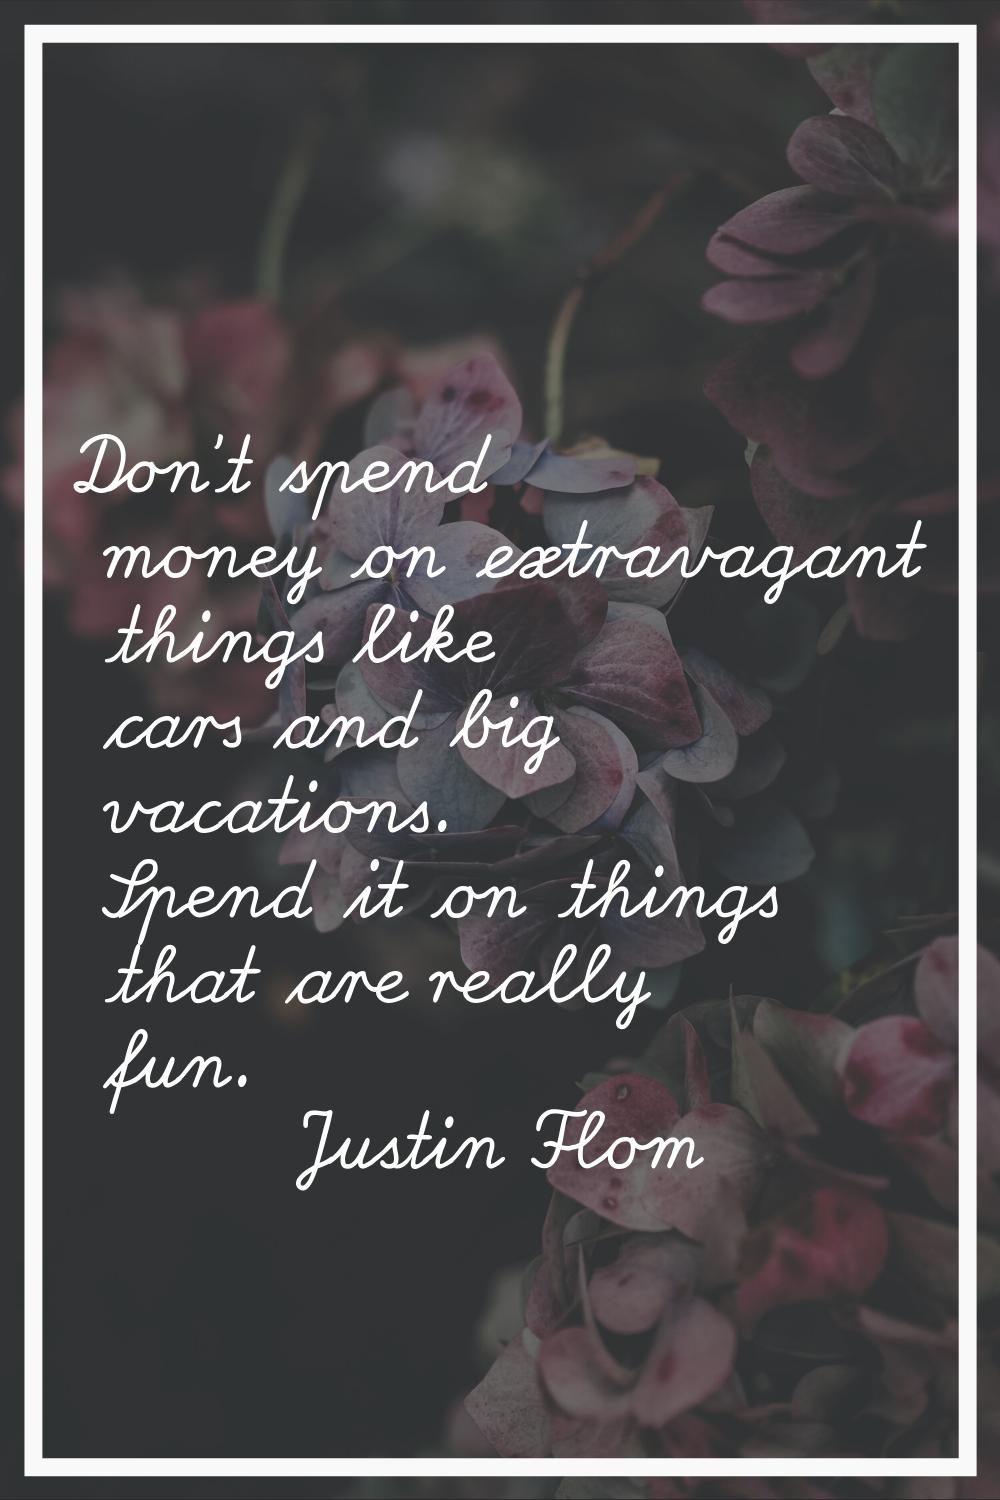 Don't spend money on extravagant things like cars and big vacations. Spend it on things that are re